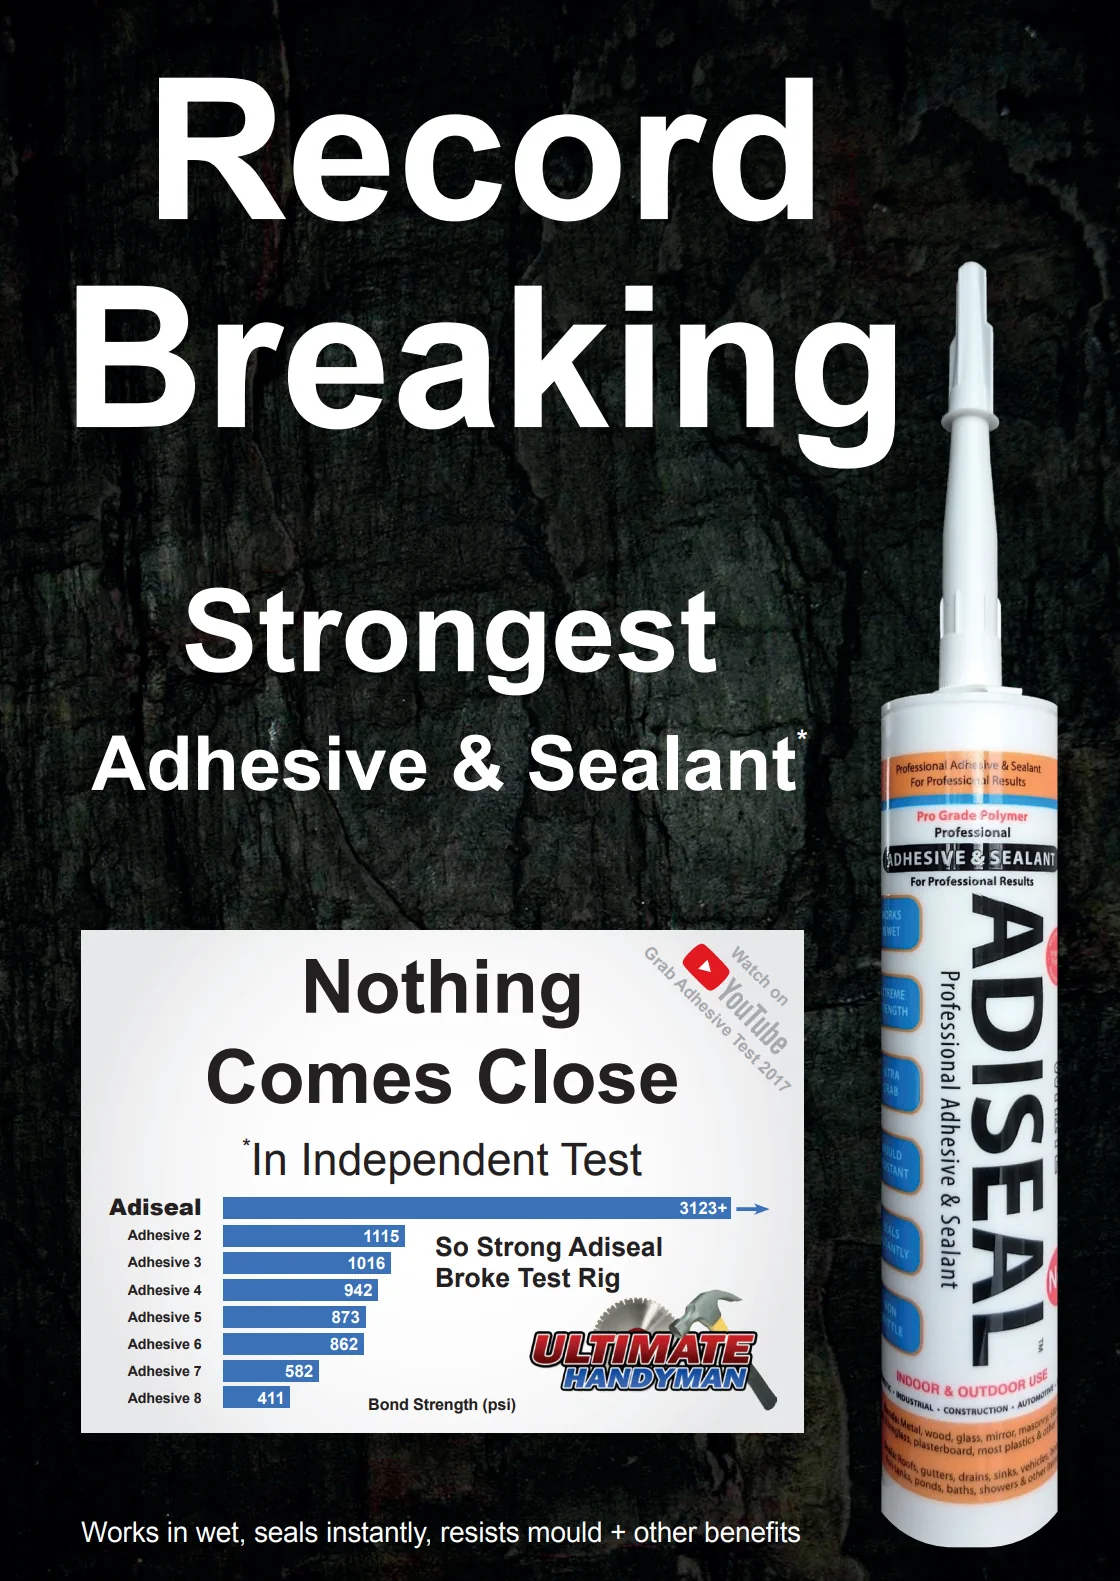 Best adhesive sealant in independent test.